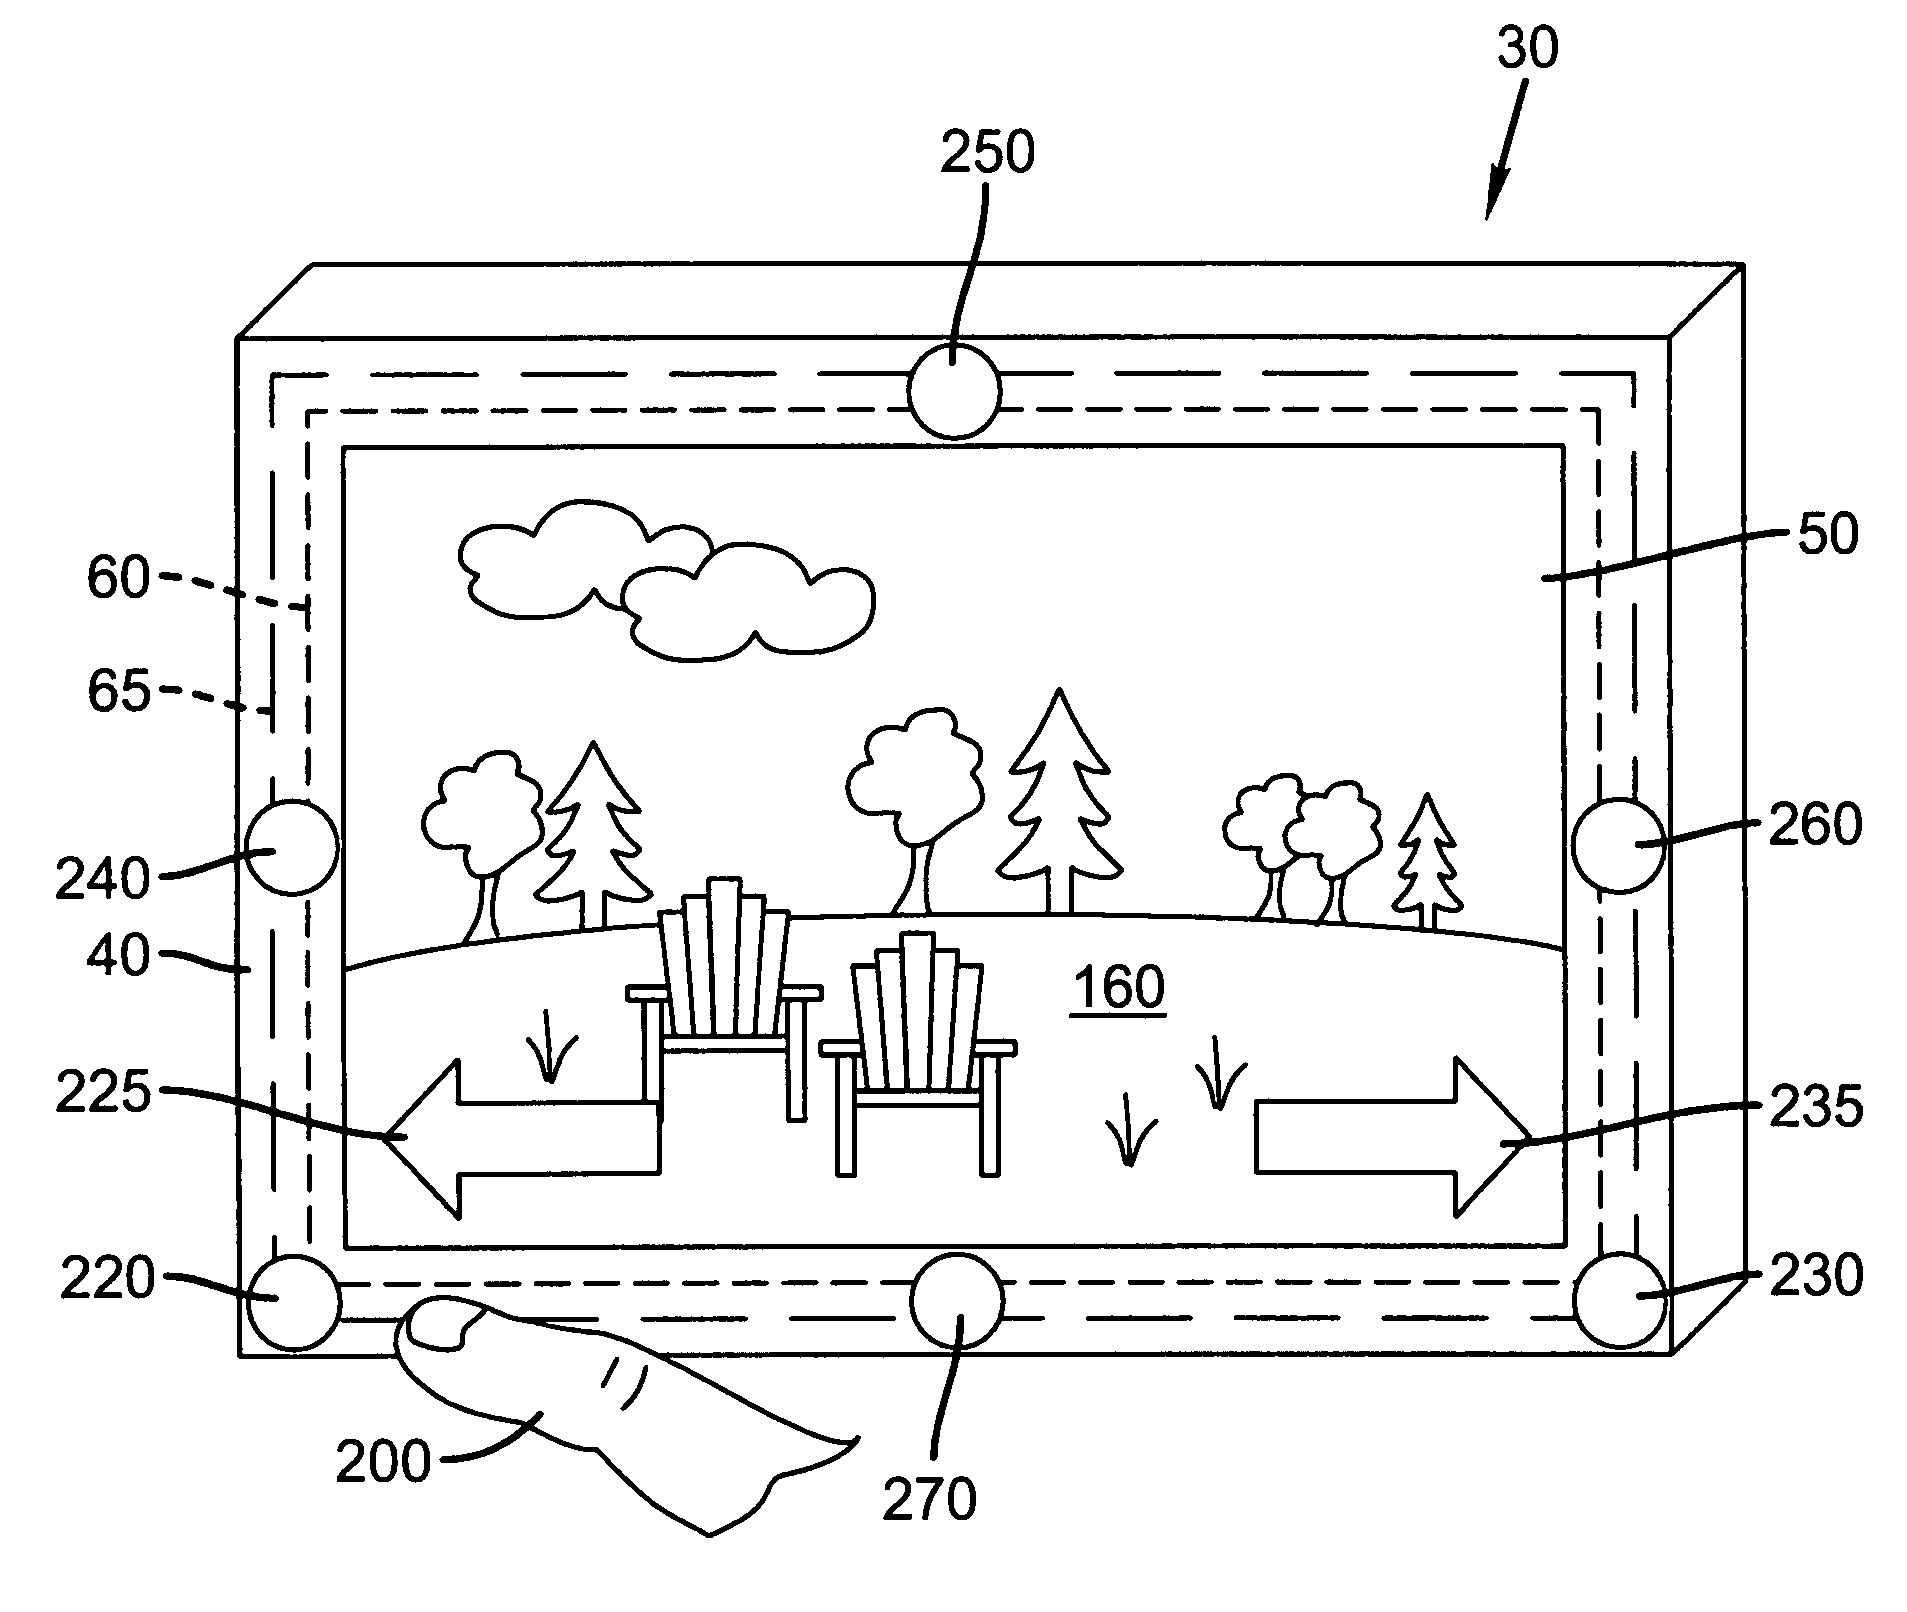 Digital picture frame having near-touch and true-touch